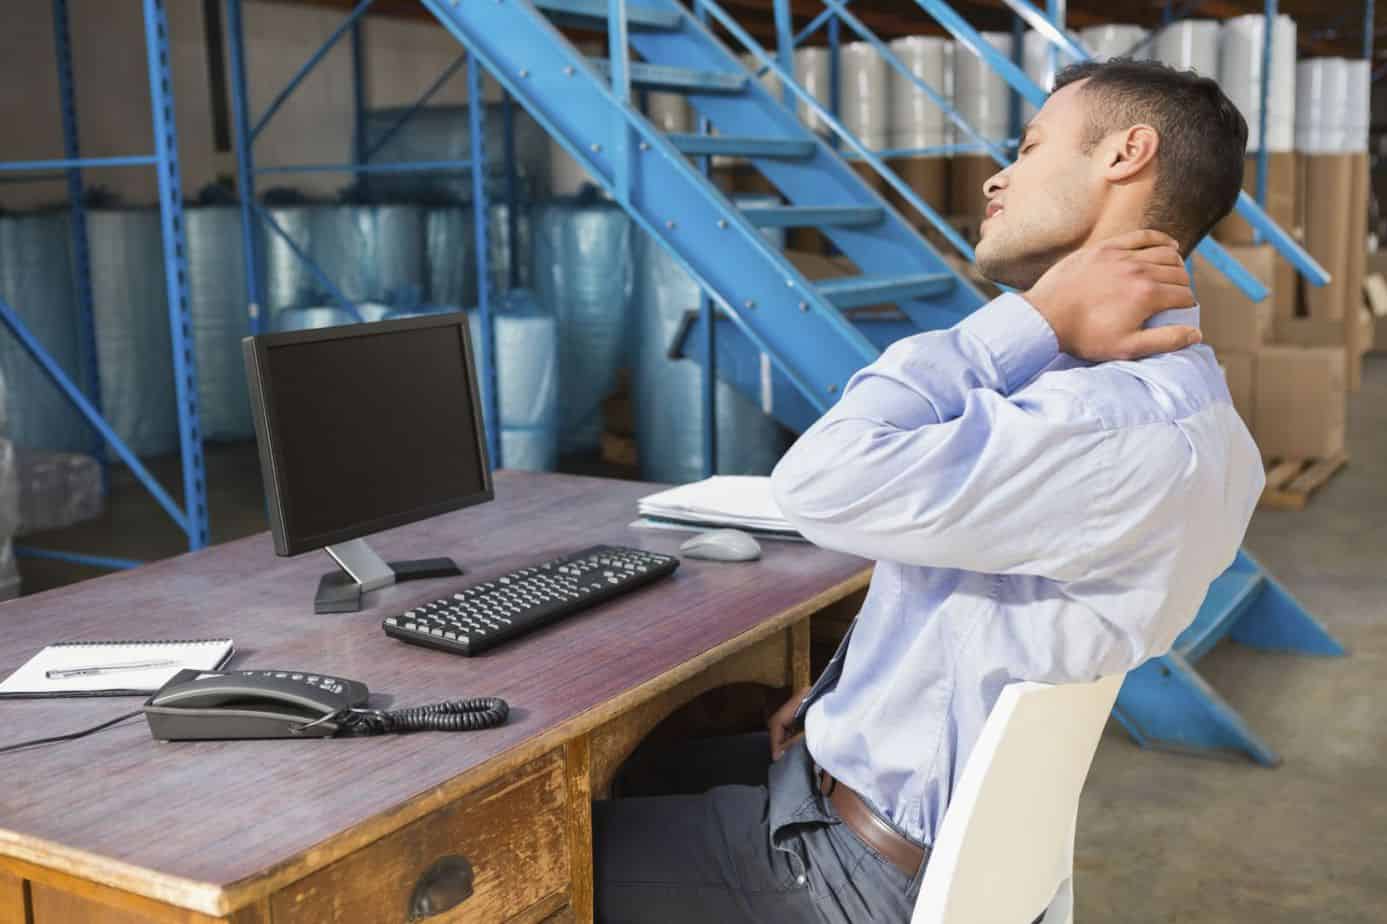 Featured image for “Workstation Retailers Should Promote Cures for Pains in the Neck”